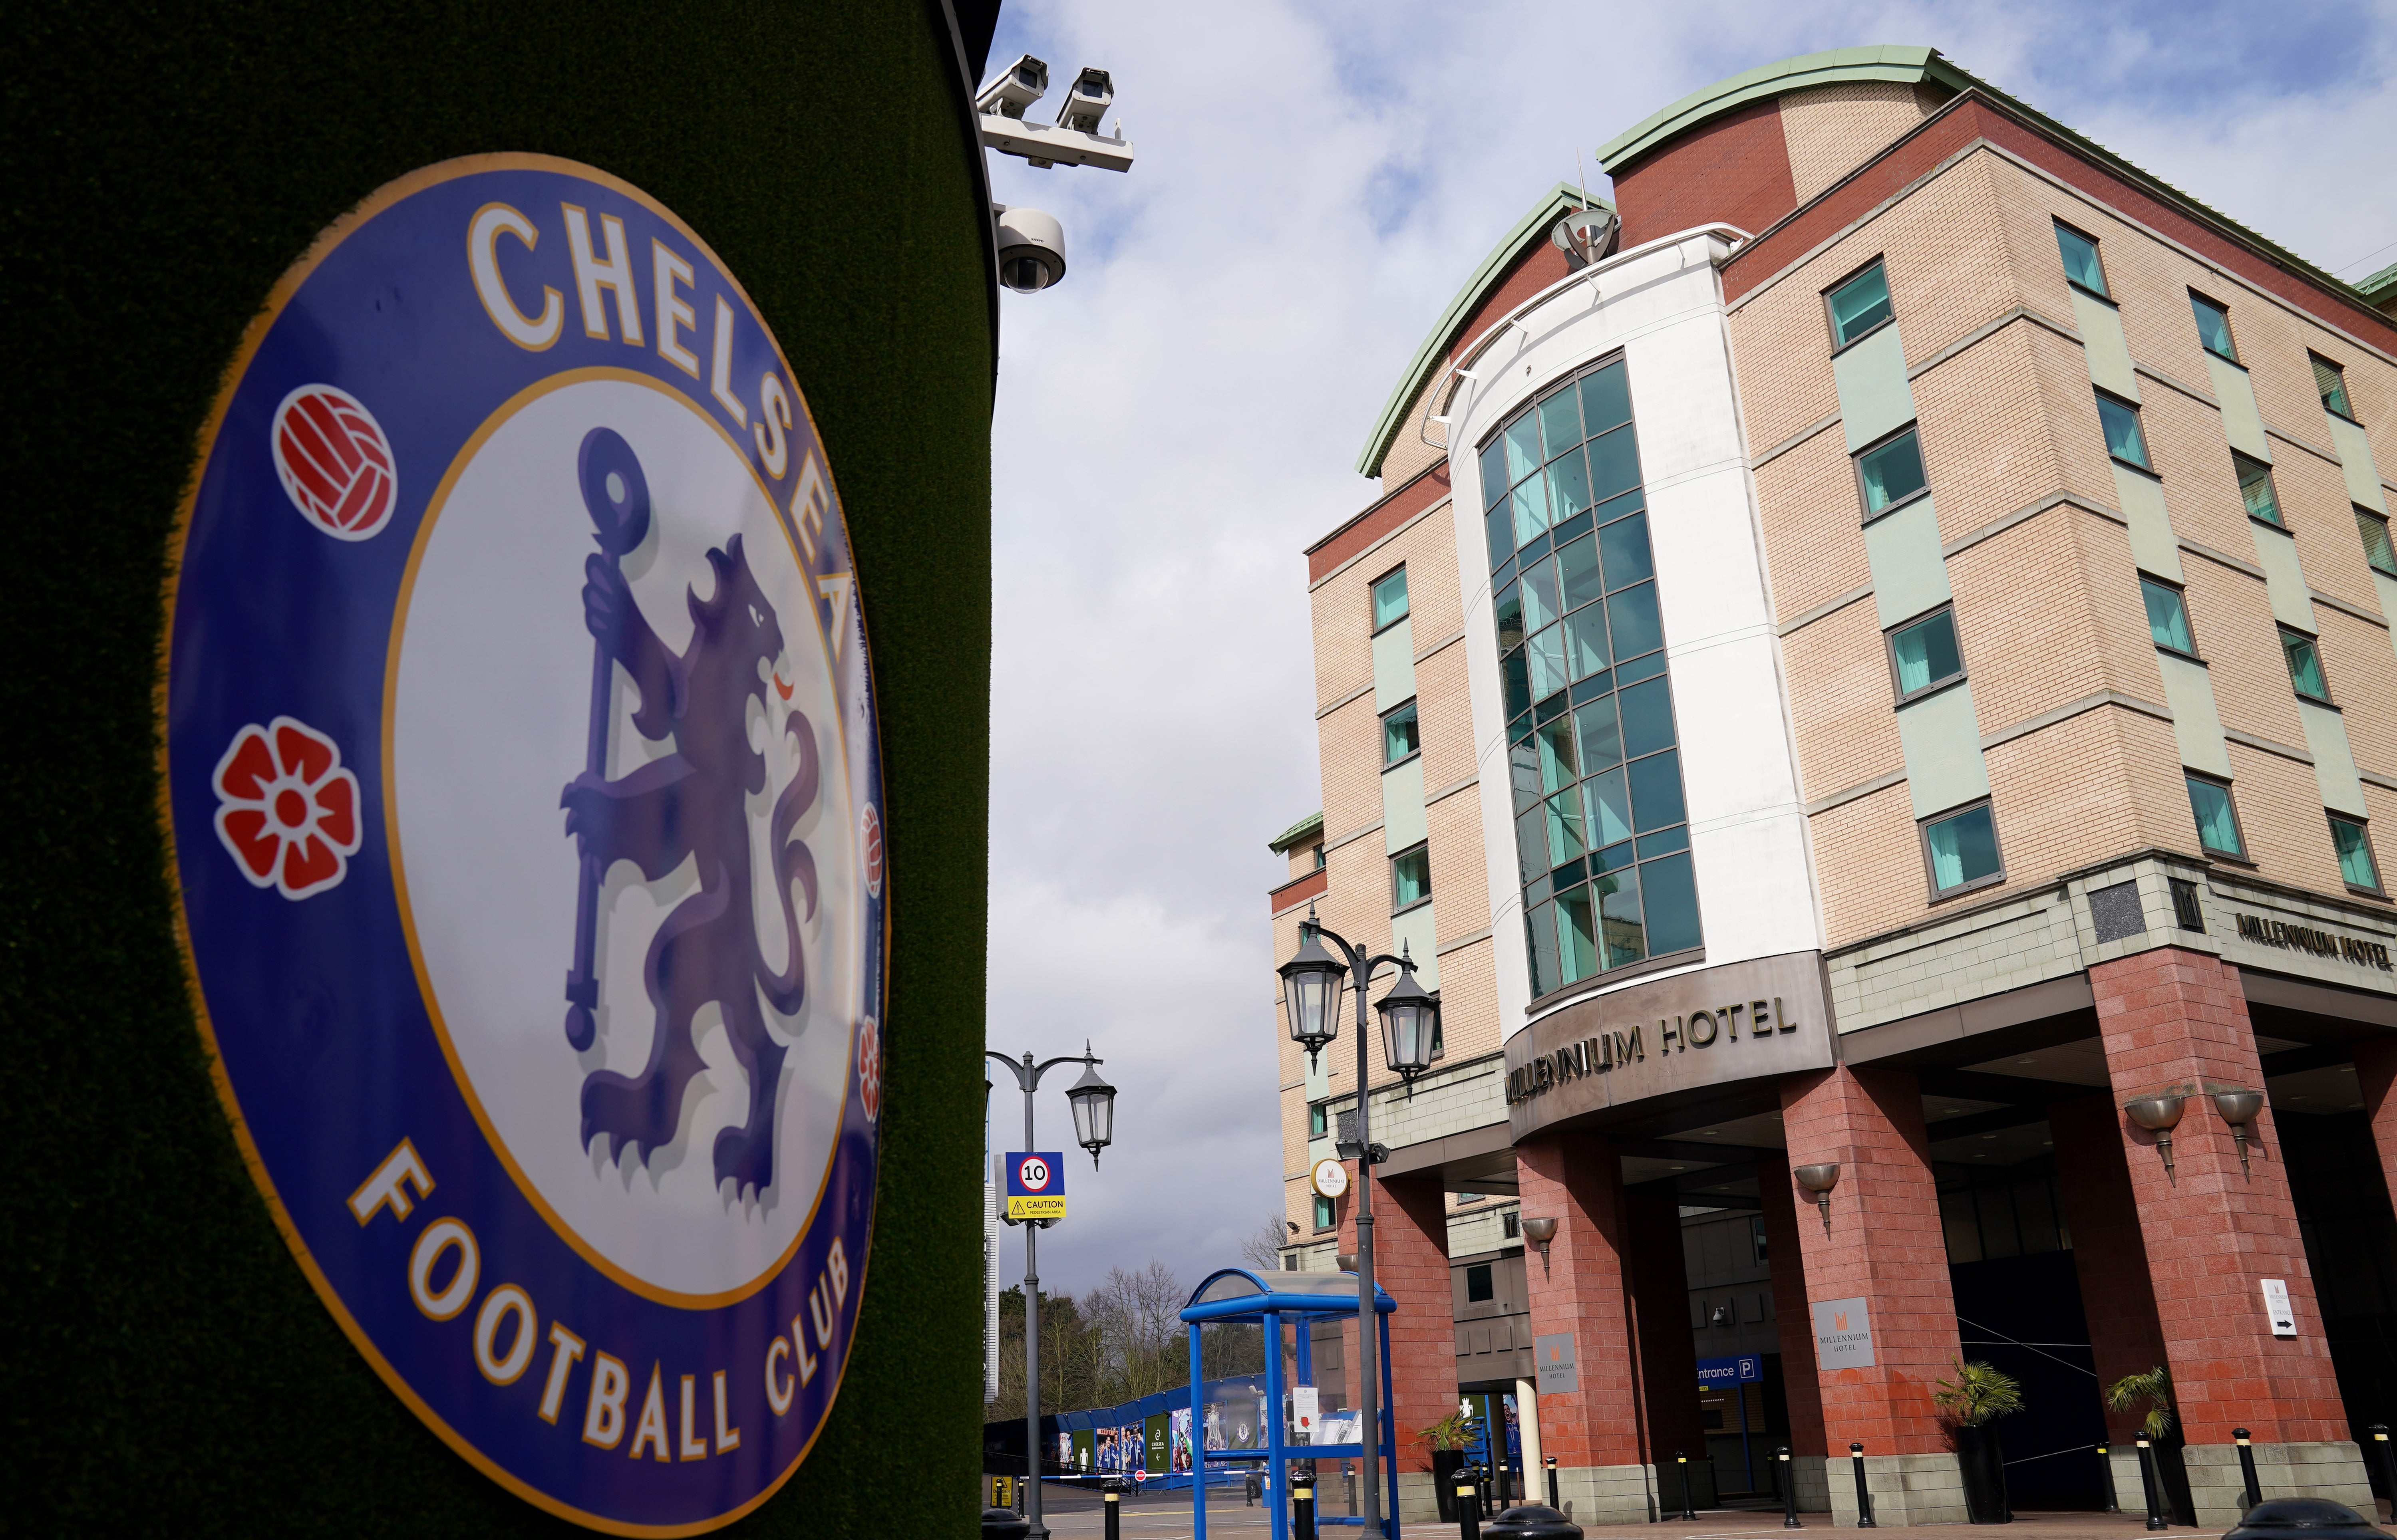 Chelsea supporters will take protests on the club’s ownership to Stamford Bridge, pictured (John Walton/PA)